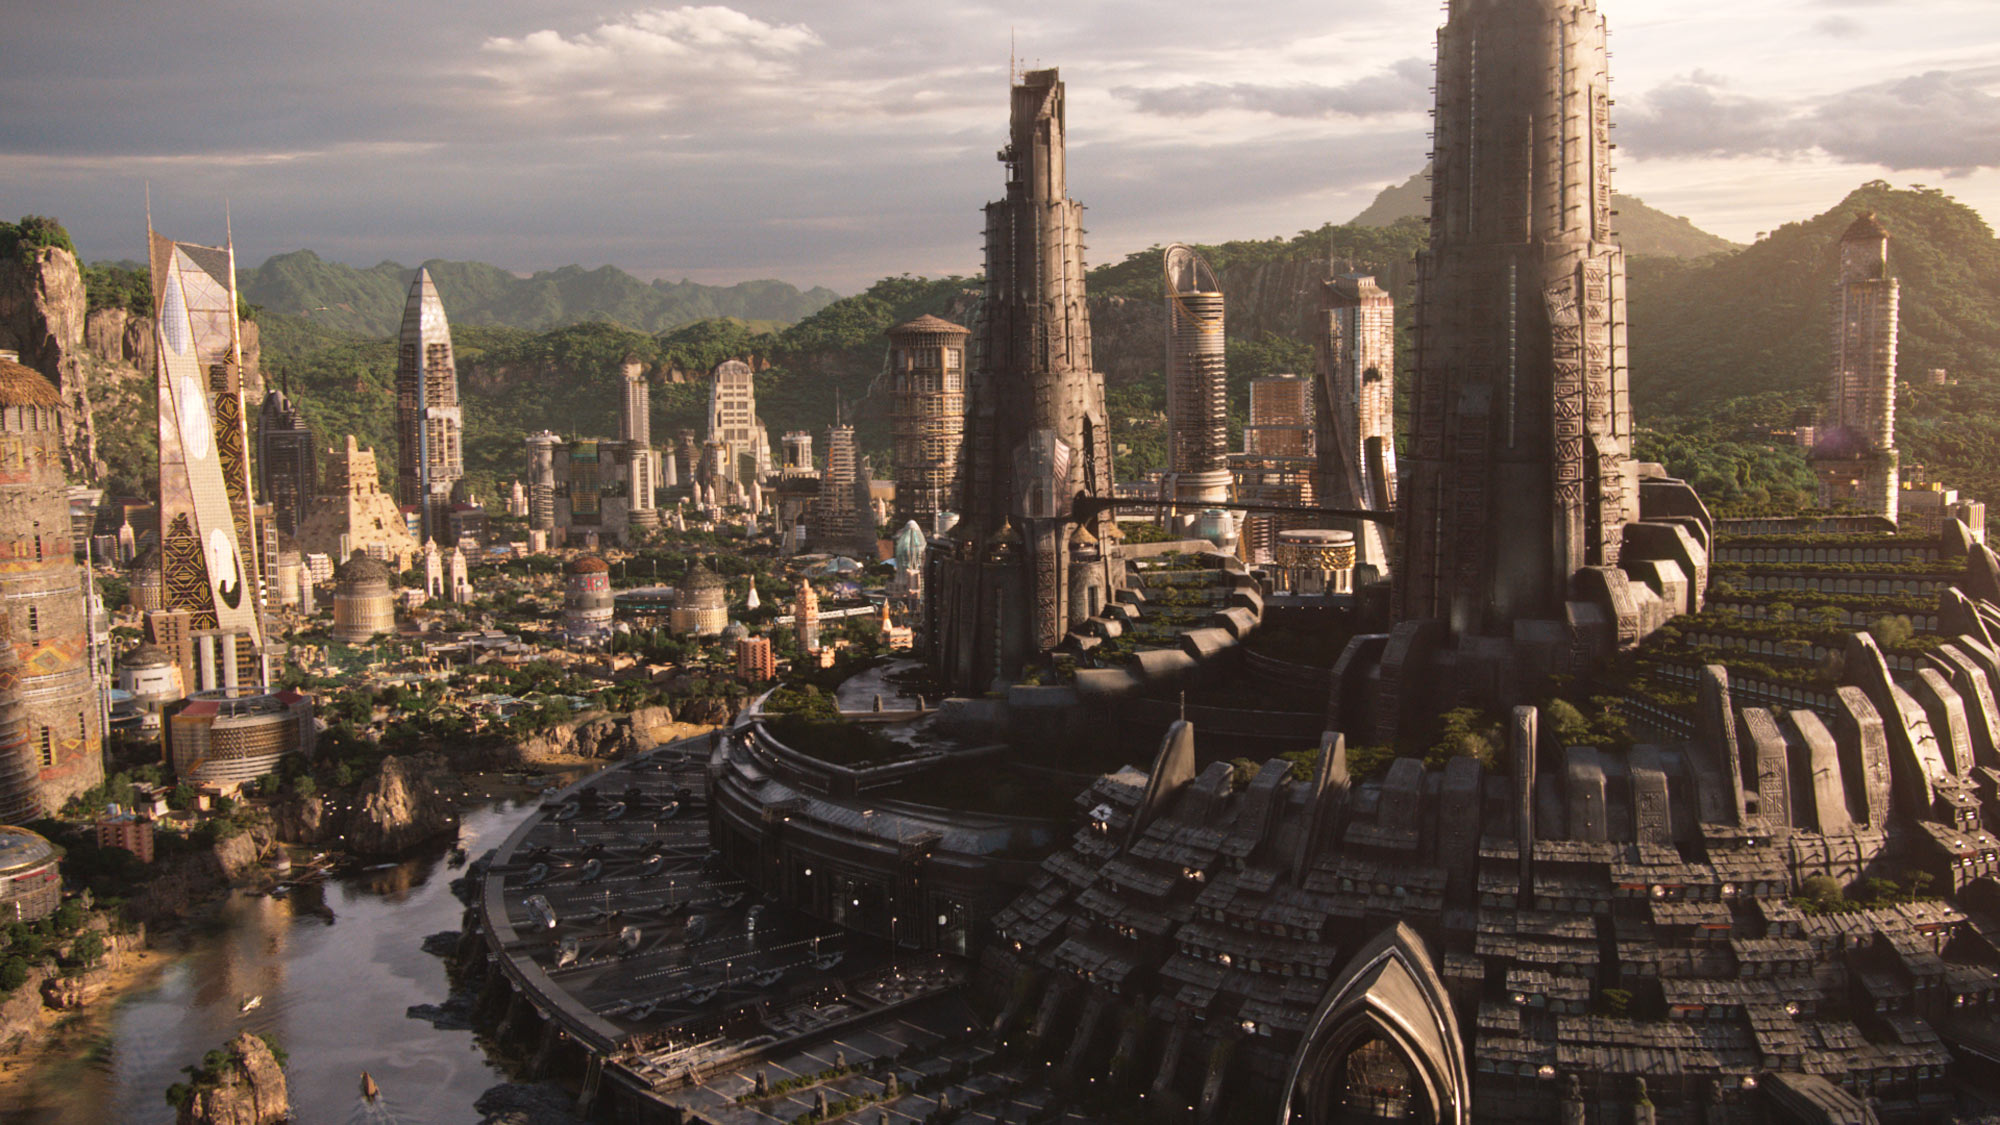 A view of Wakanda, which will be the focus of a Disney Plus series, one of the upcoming marvel shows